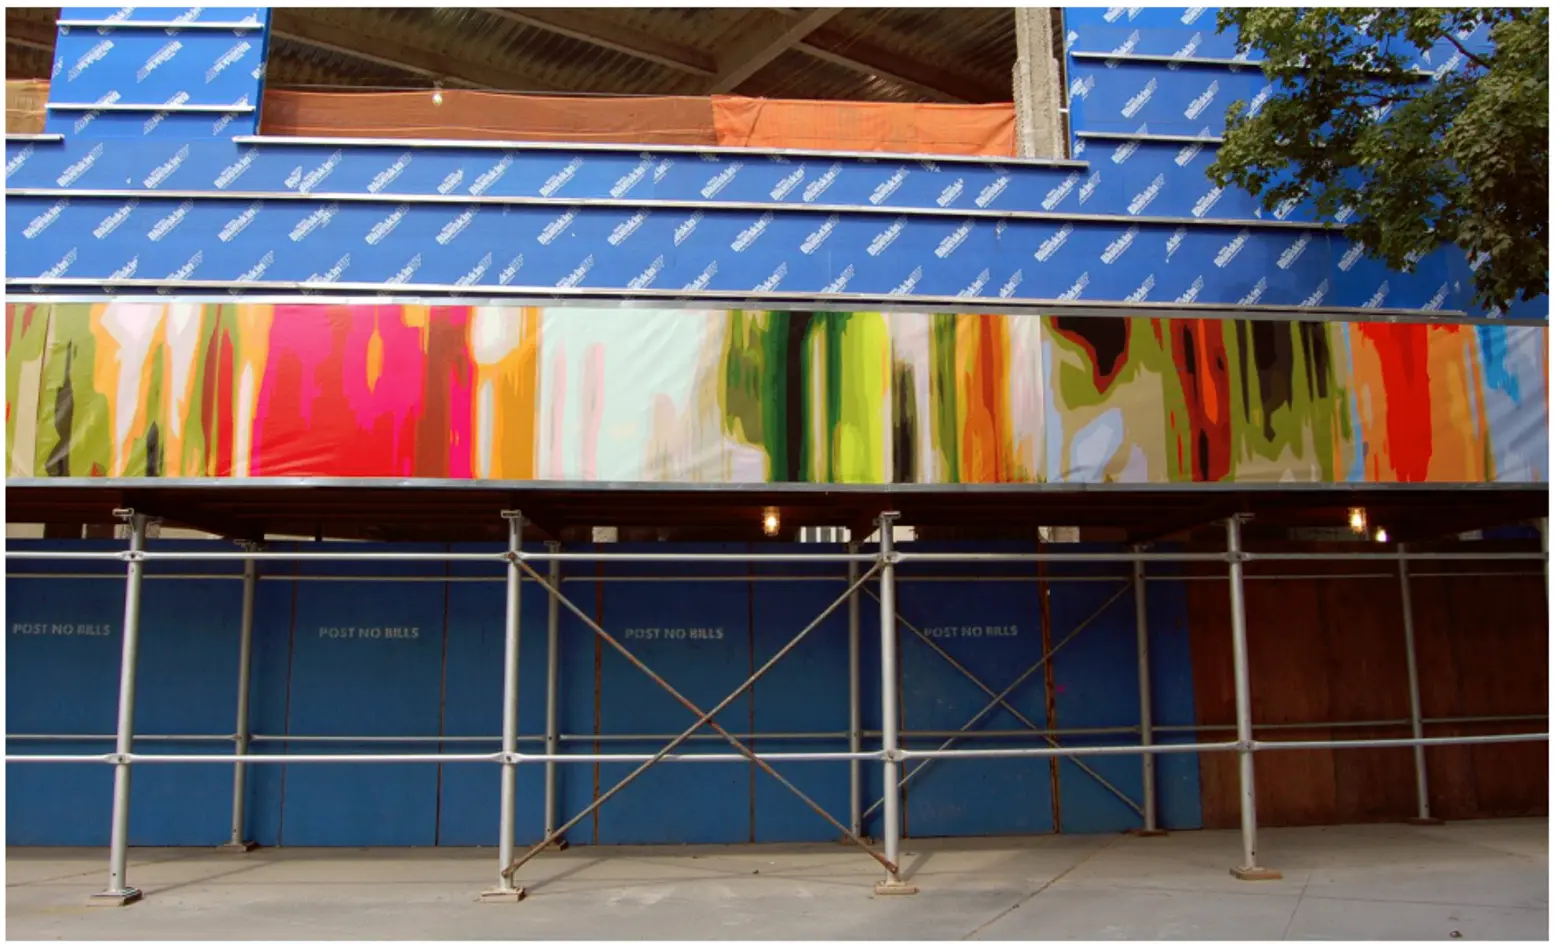 City calls on artists to add flair to drab construction fences in two-year pilot program